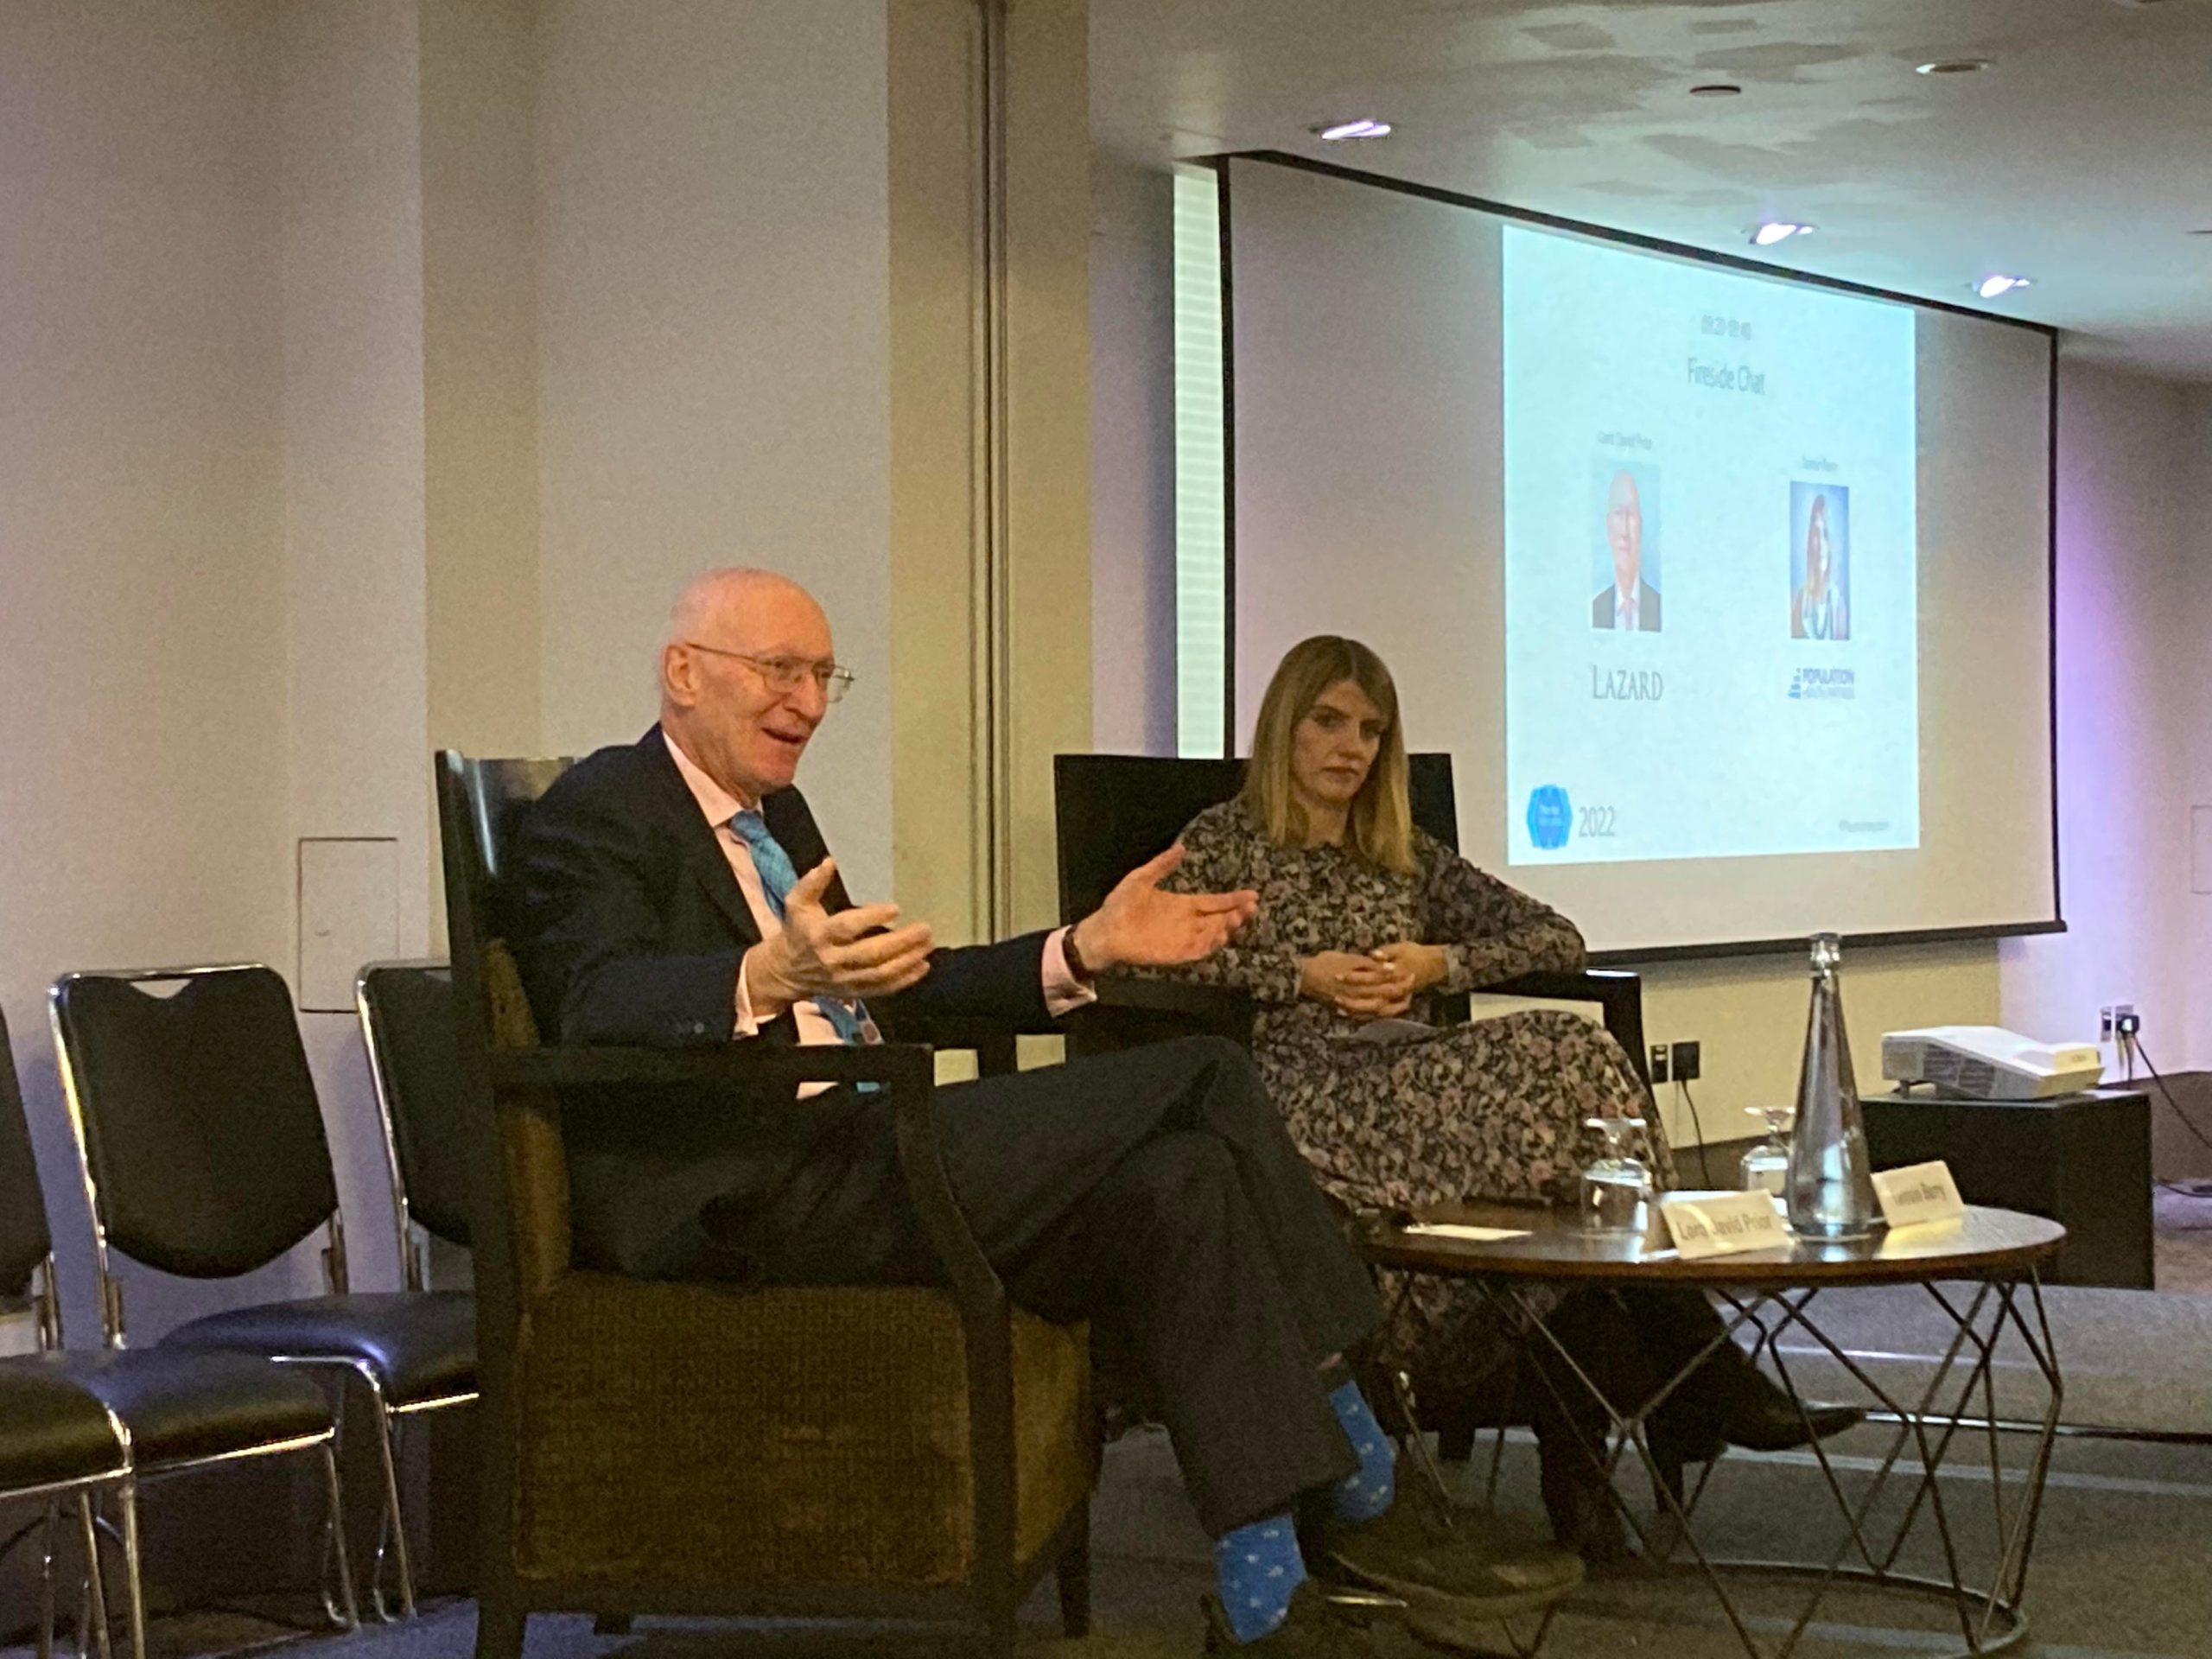 Event Summary: Pharma and healthcare leaders discuss the innovations to fix our health system at Pharma Integrates 2022